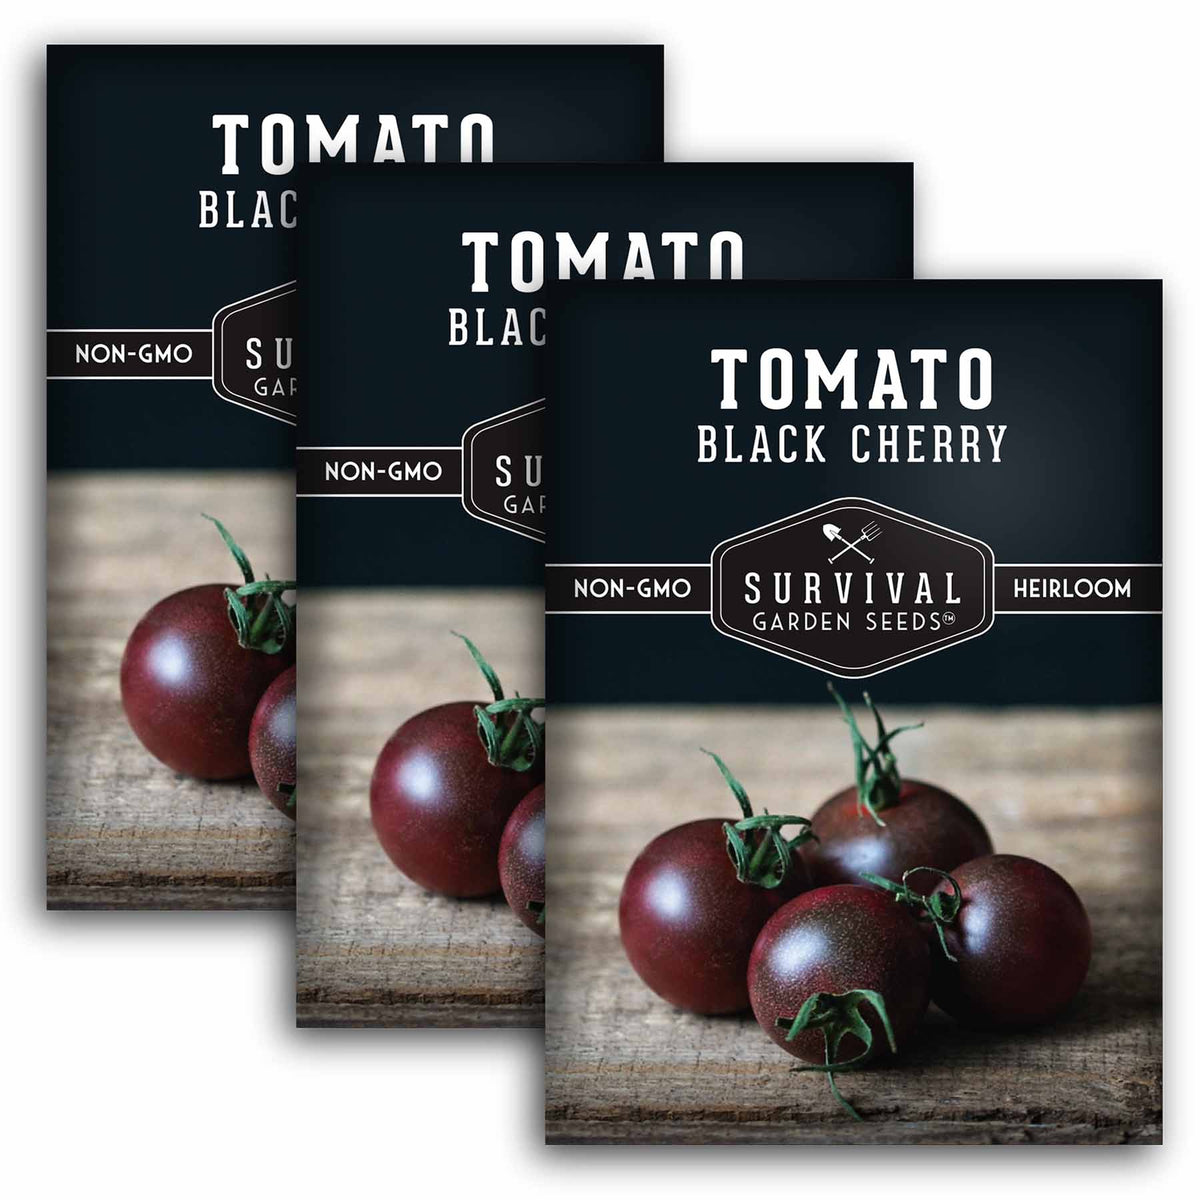 3 packets of Black Cherry Tomato seeds